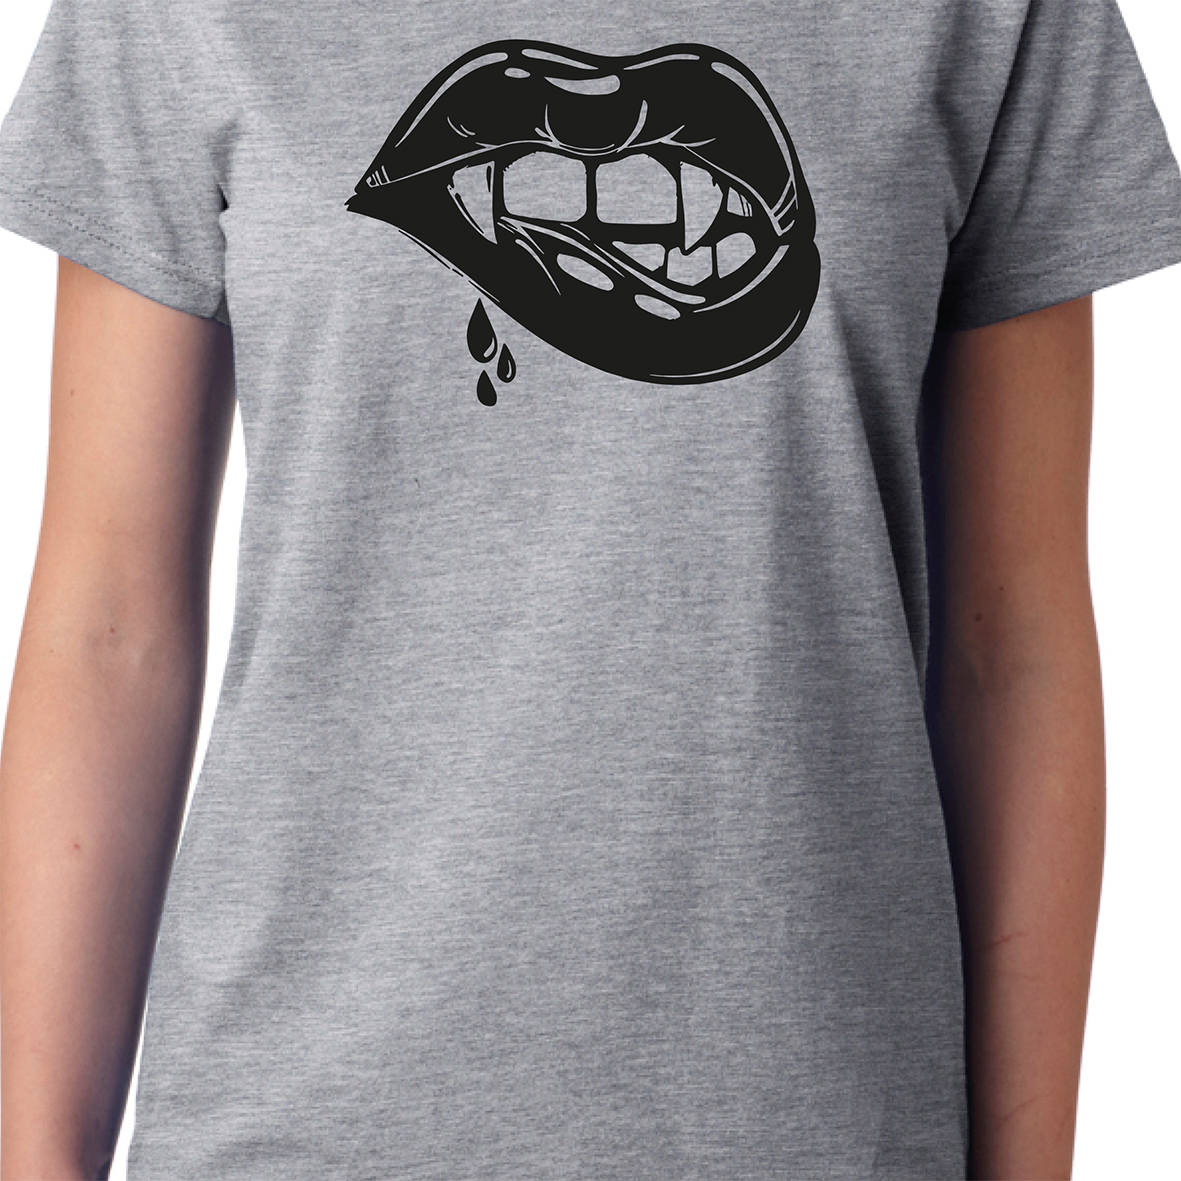 Vampire Mouth T-Shirt, Fangs, Funny, Halloween